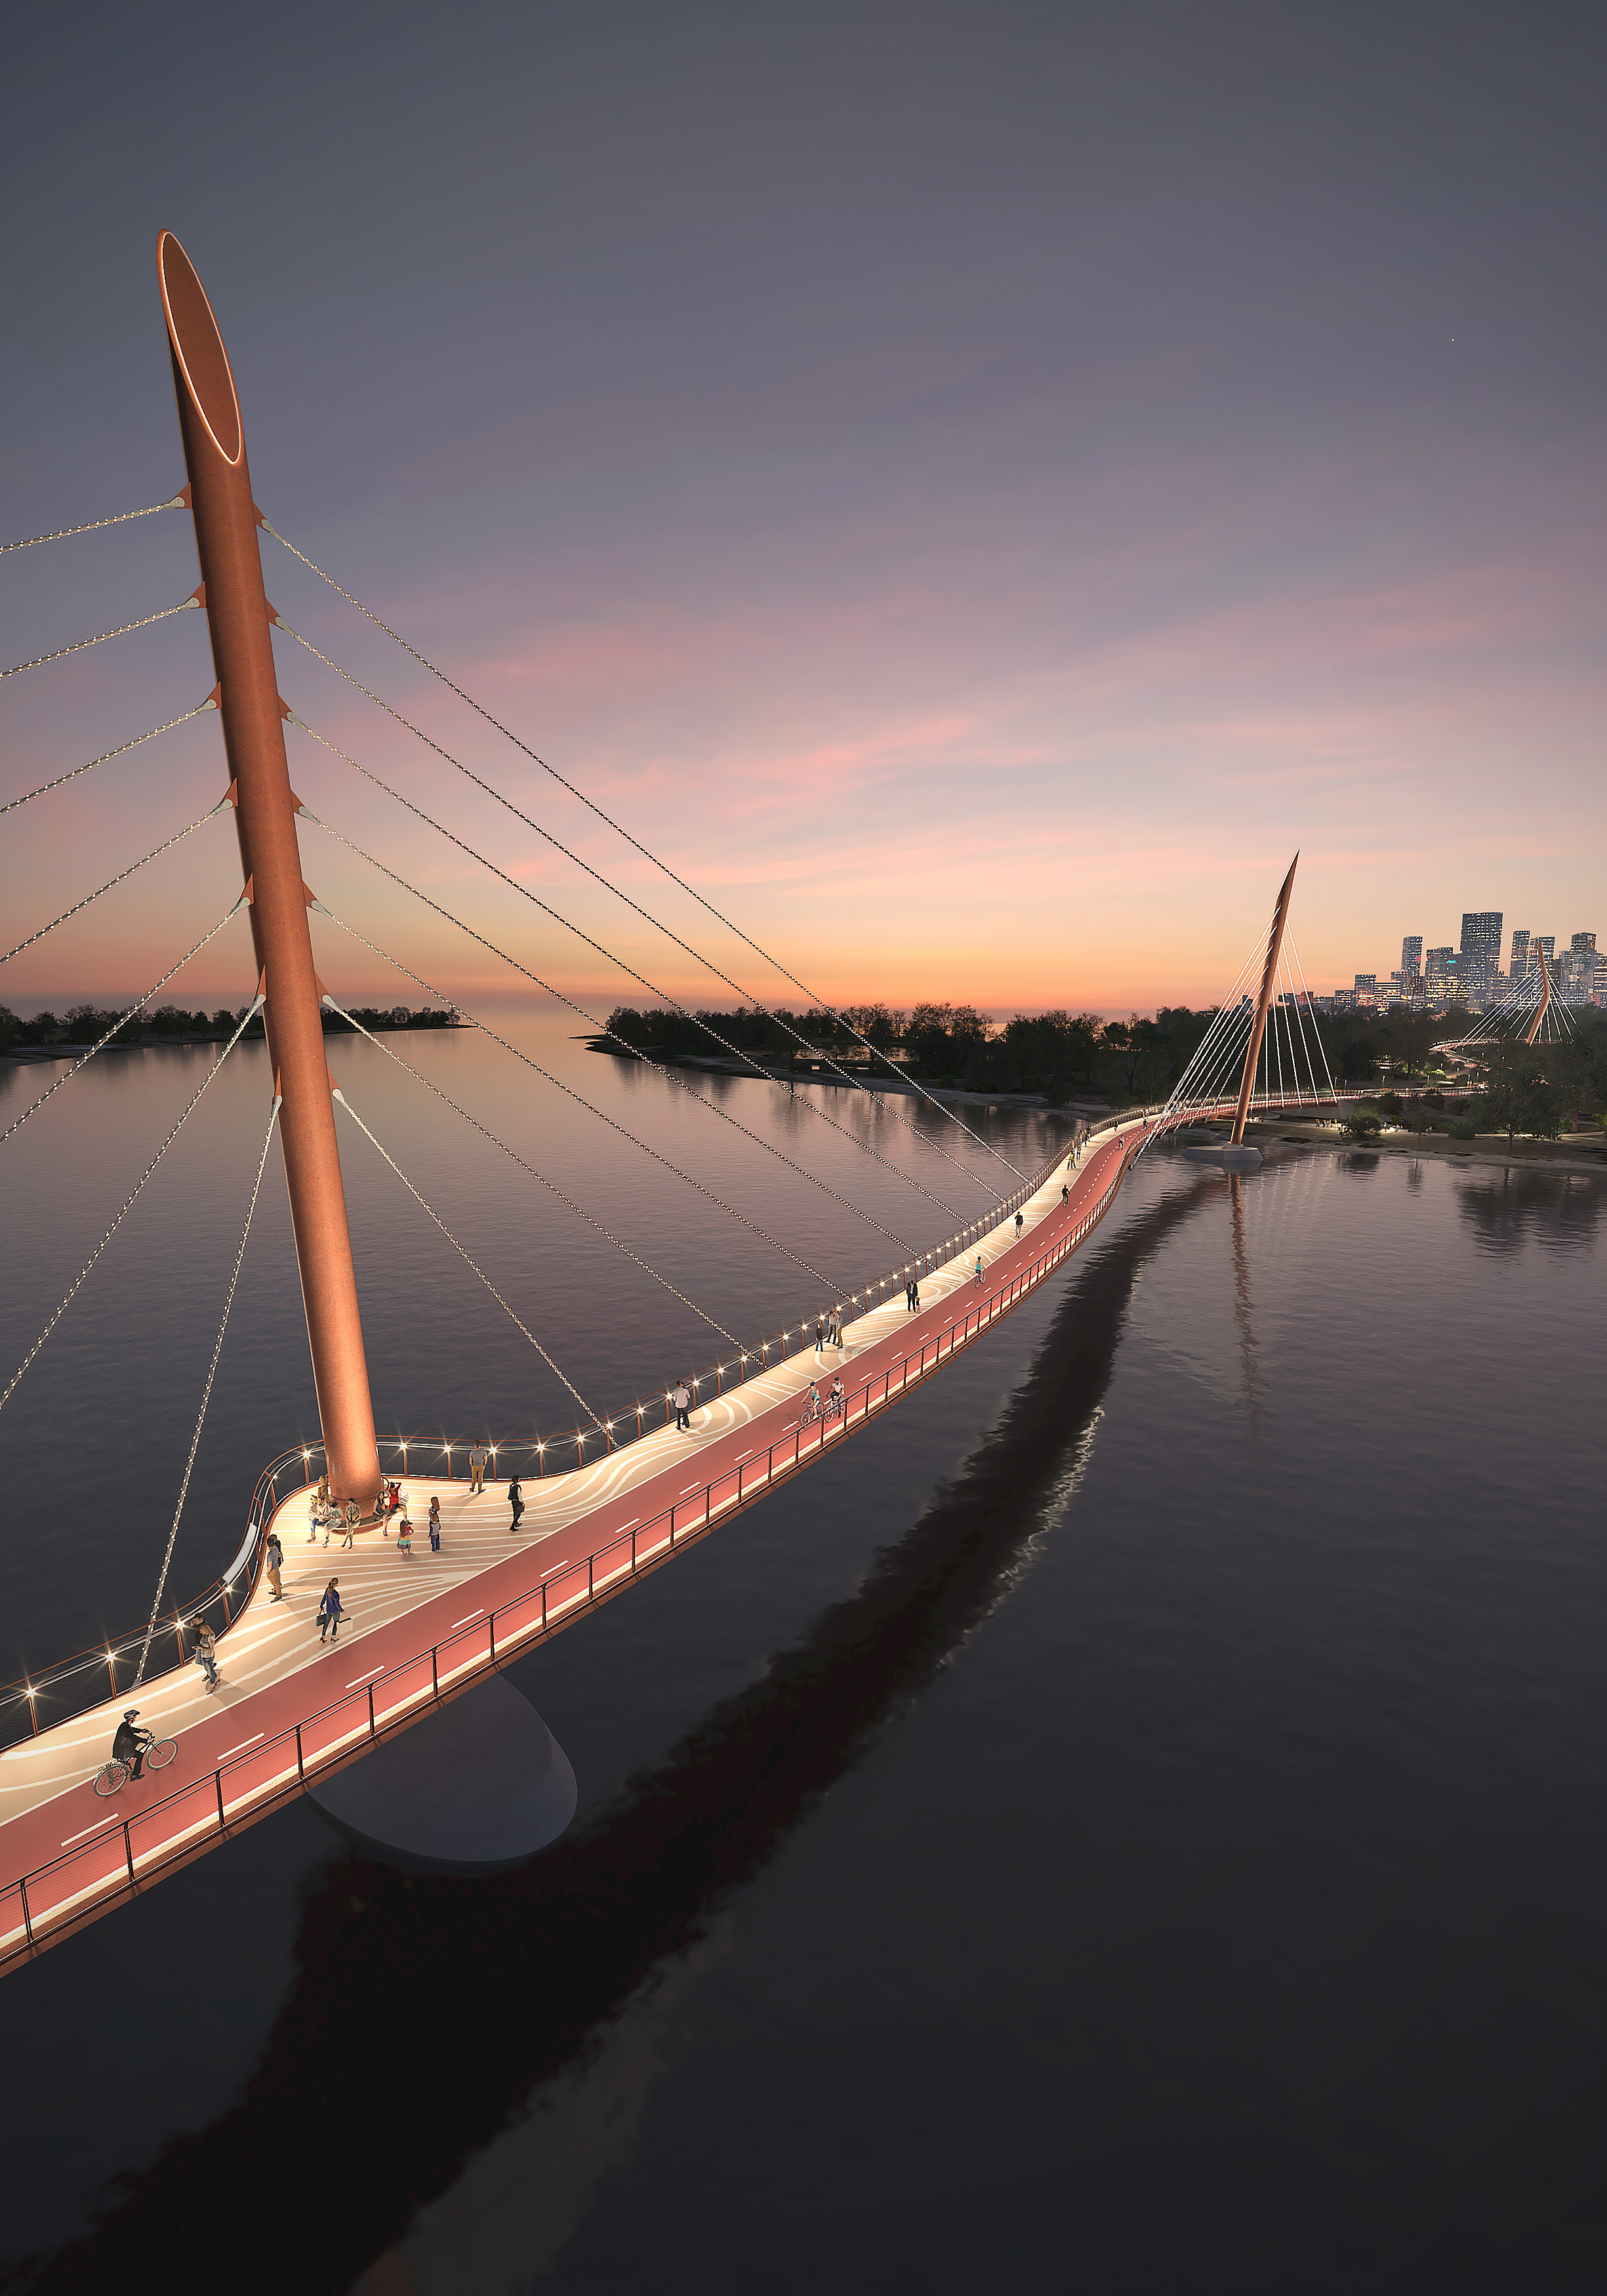 Artists impression of the bridges during the evening